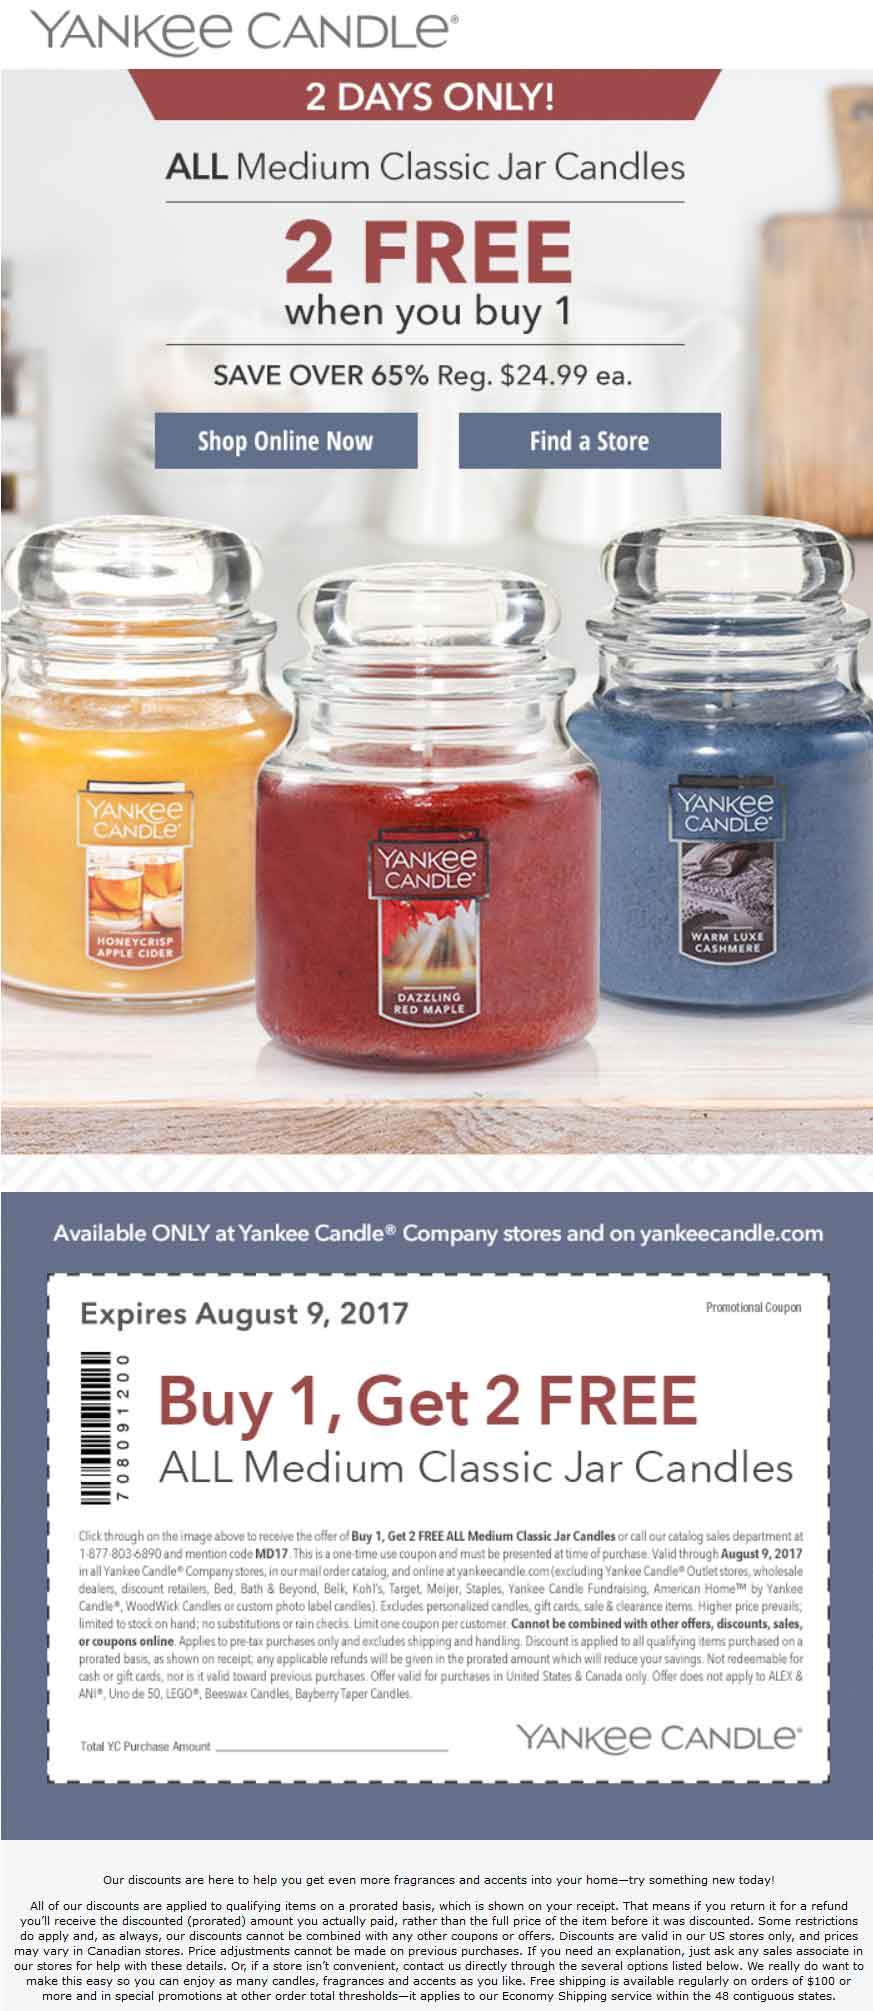 Yankee Candle Coupon April 2024 3-for-1 on medium candles today at Yankee Candle, or online via promo code MD17